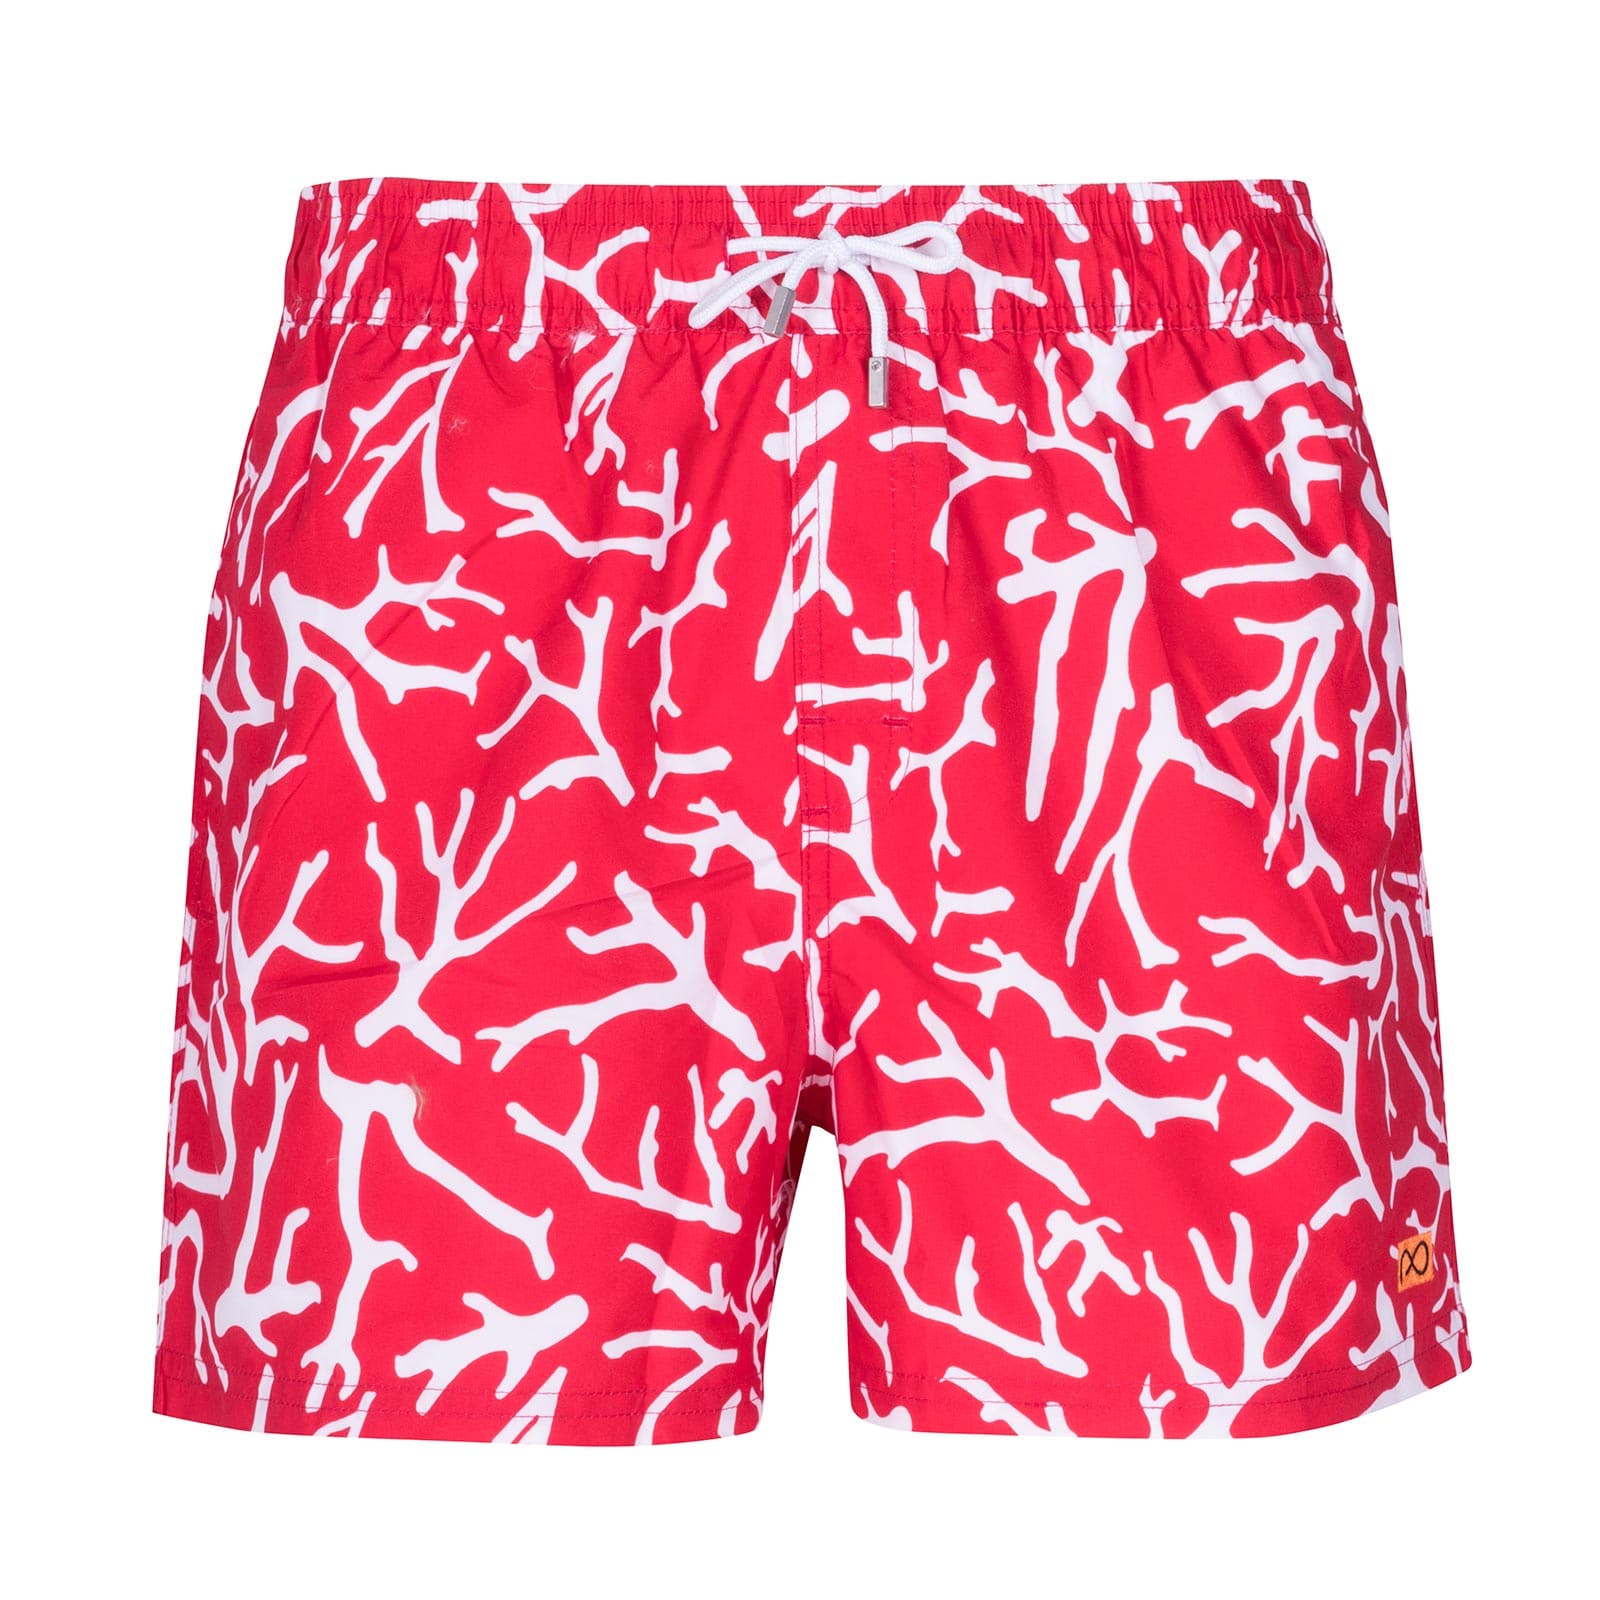 Prince Oliver Swimsuit Red with Patterns - Prince Oliver